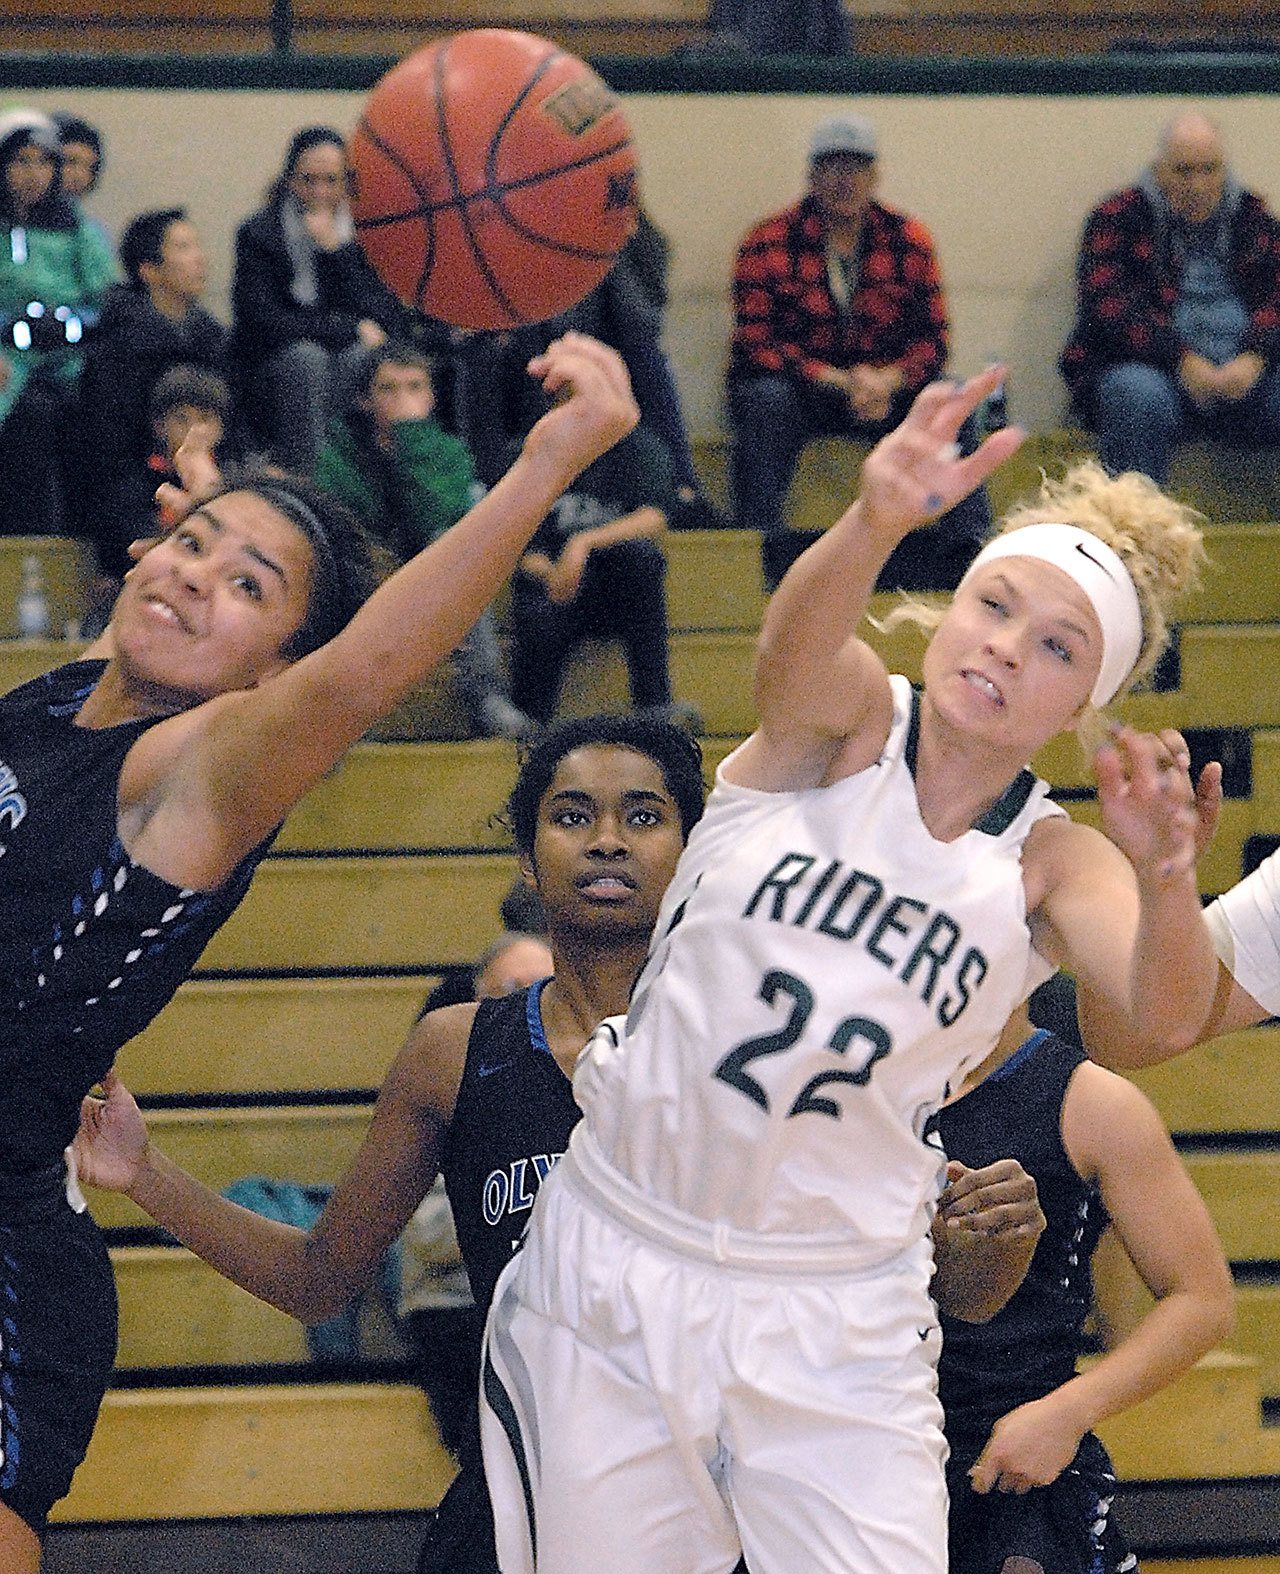 Keith Thorpe/Peninsula Daily News Port Angeles’ Natalie Steinman, right, fights for a rebound with Olympic’s Kiki Mitchell, left, as Olympic’s Kahlishia Grant looks on during the second quarter on Tuesday at Port Angeles High School.